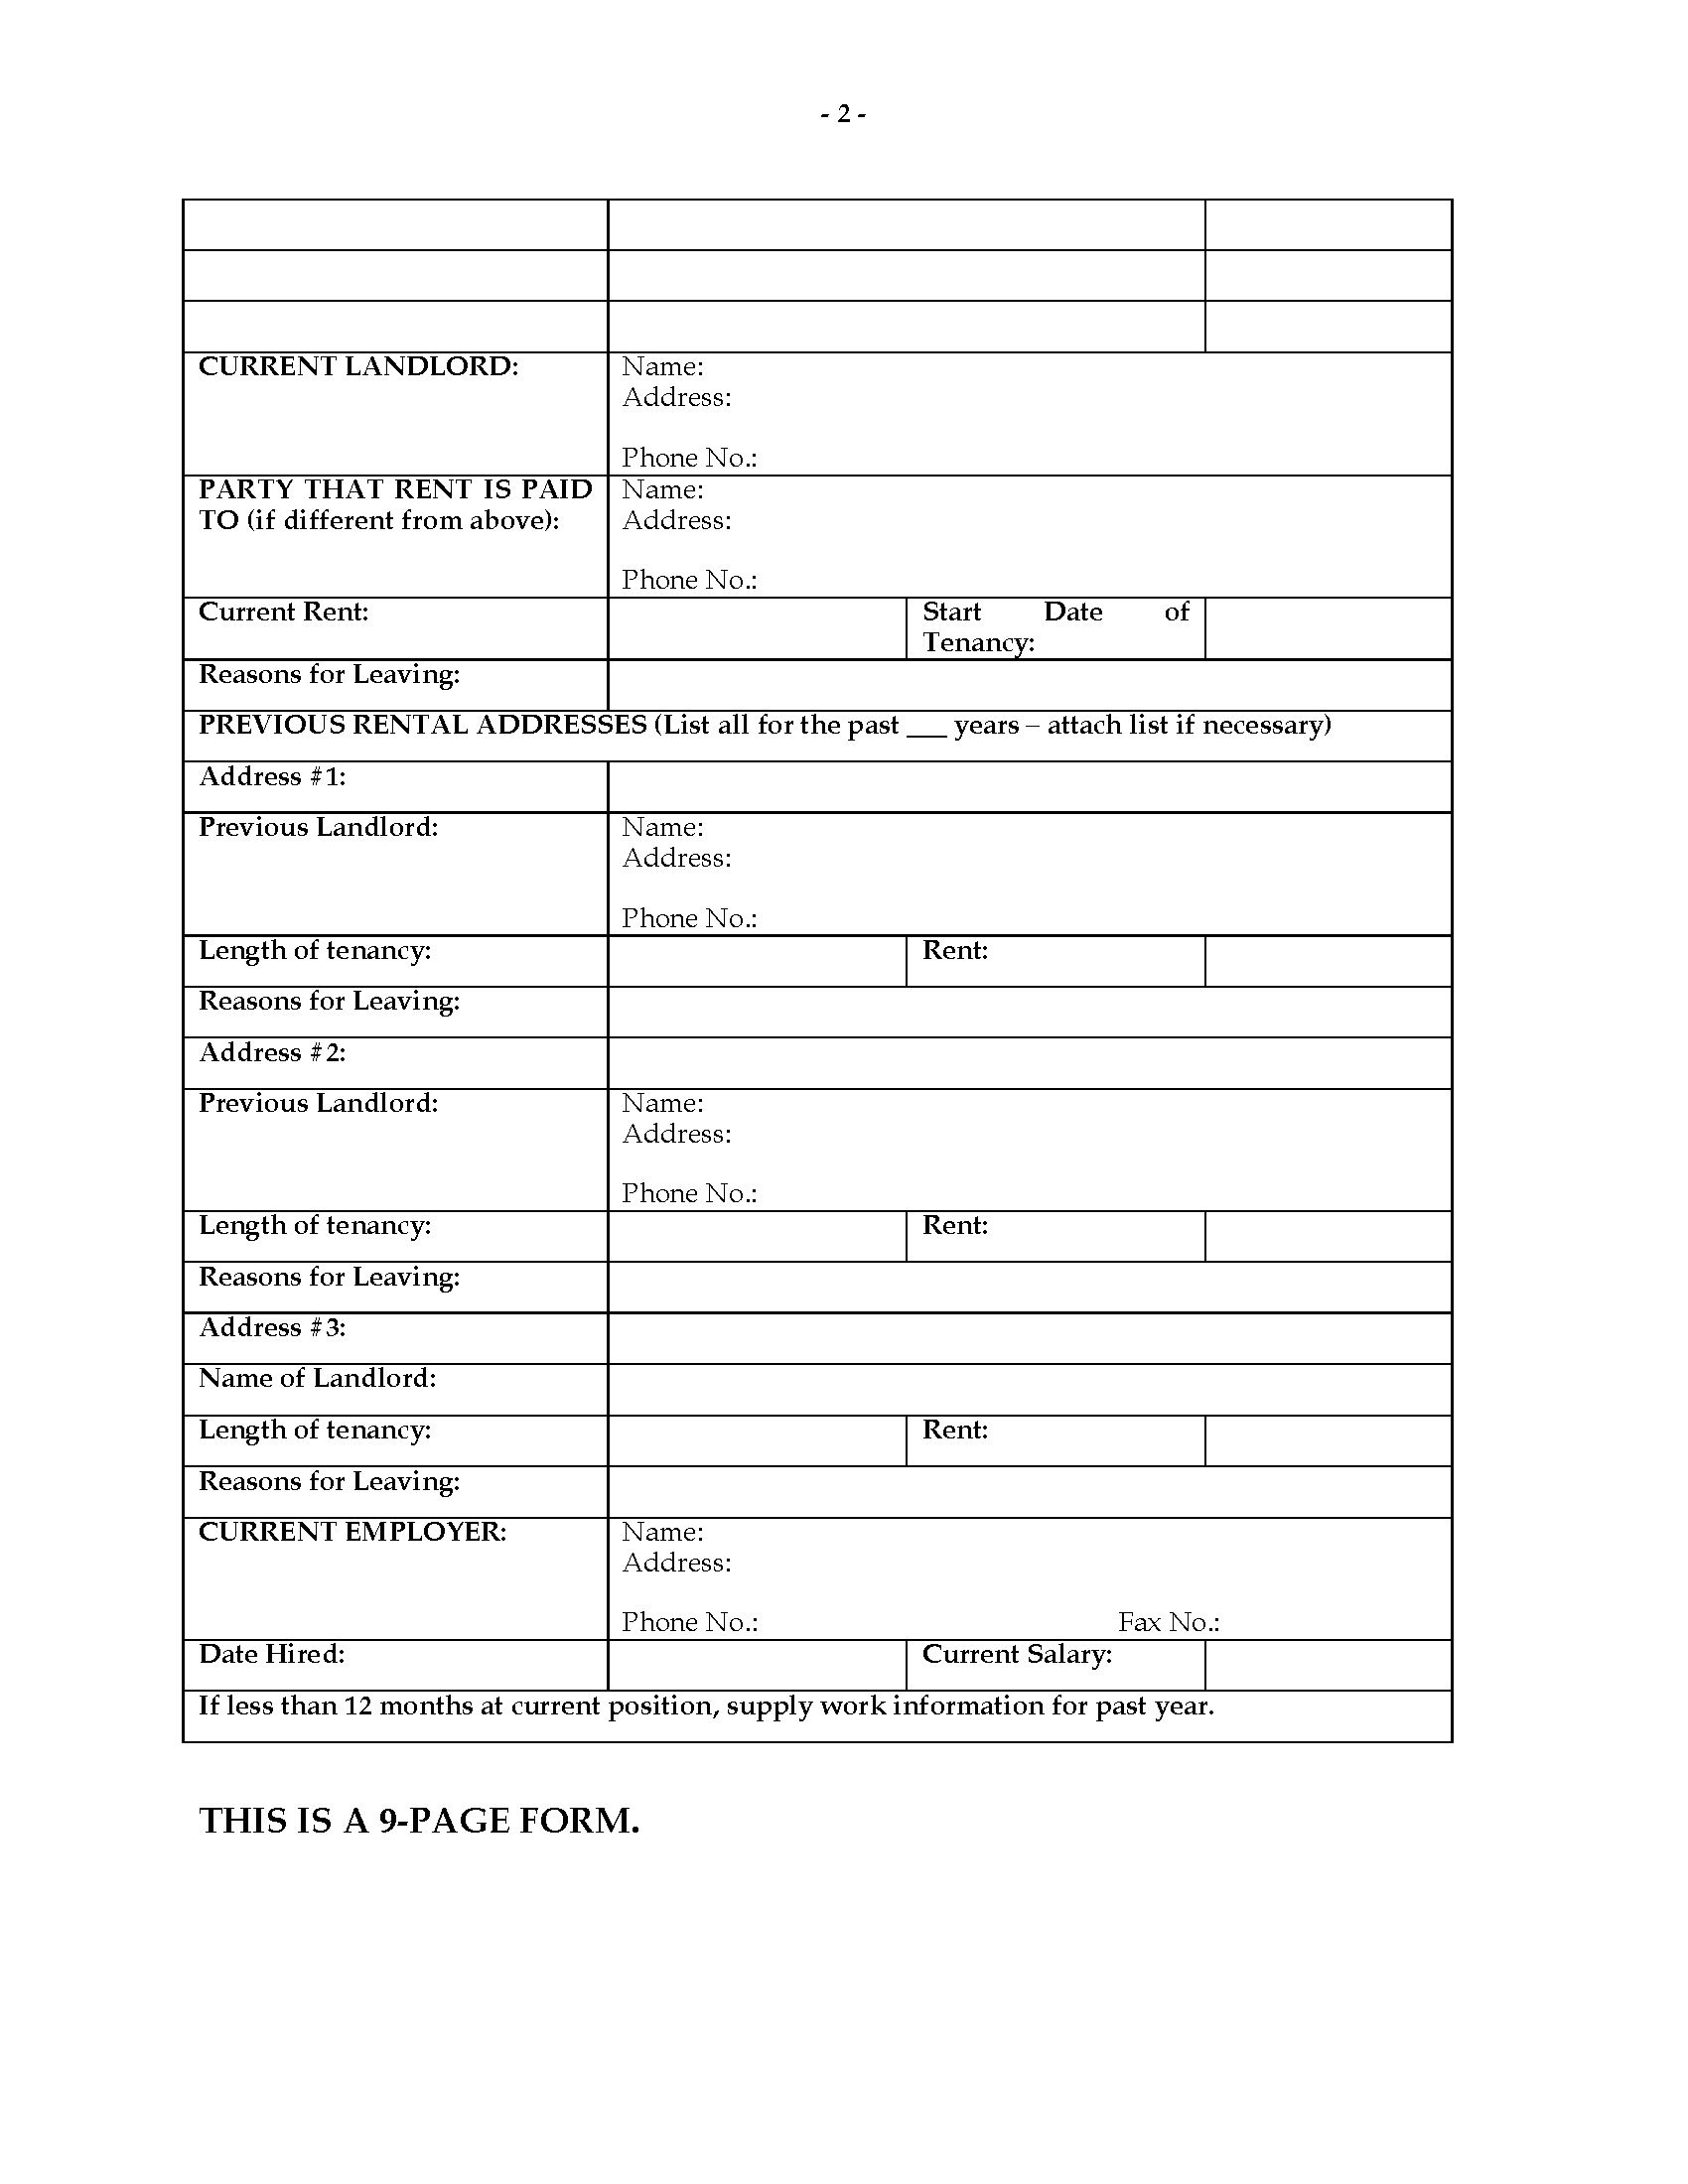 arkansas-rental-application-form-legal-forms-and-business-templates